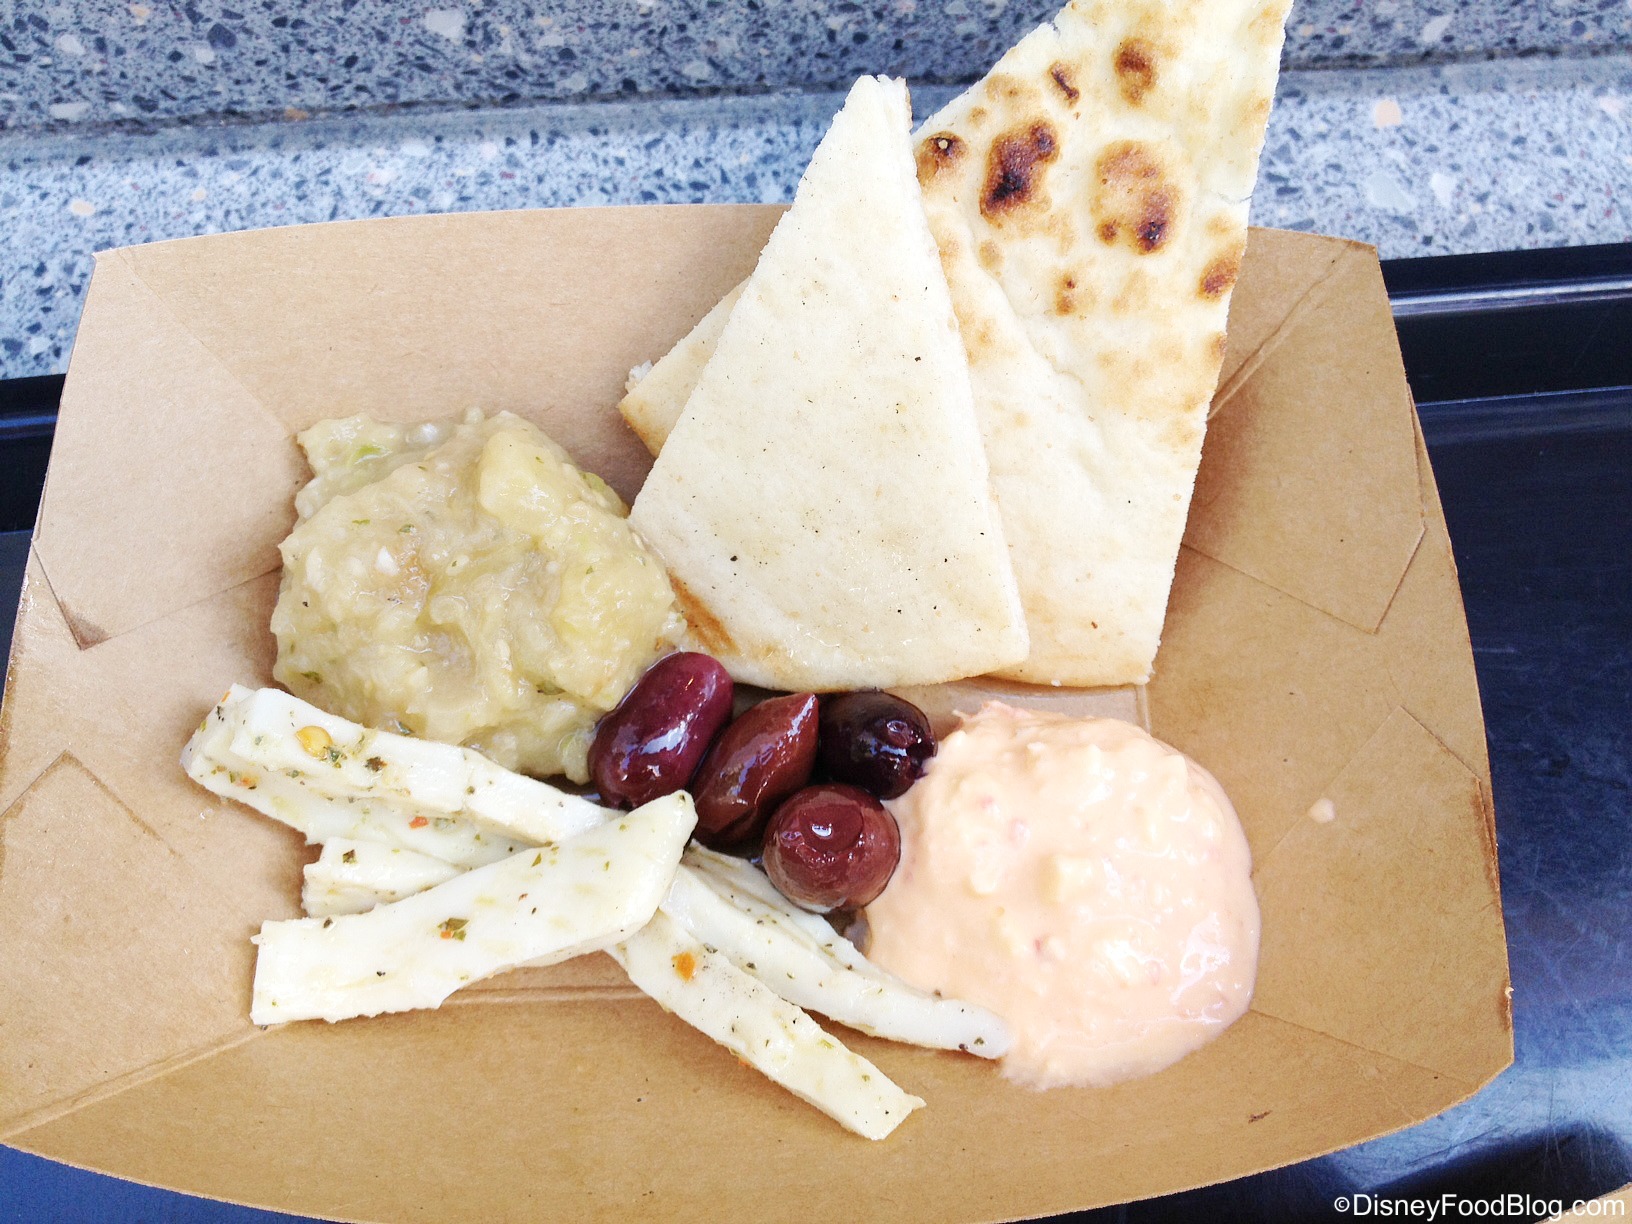 Greece: 2013 Epcot Food and Wine Festival